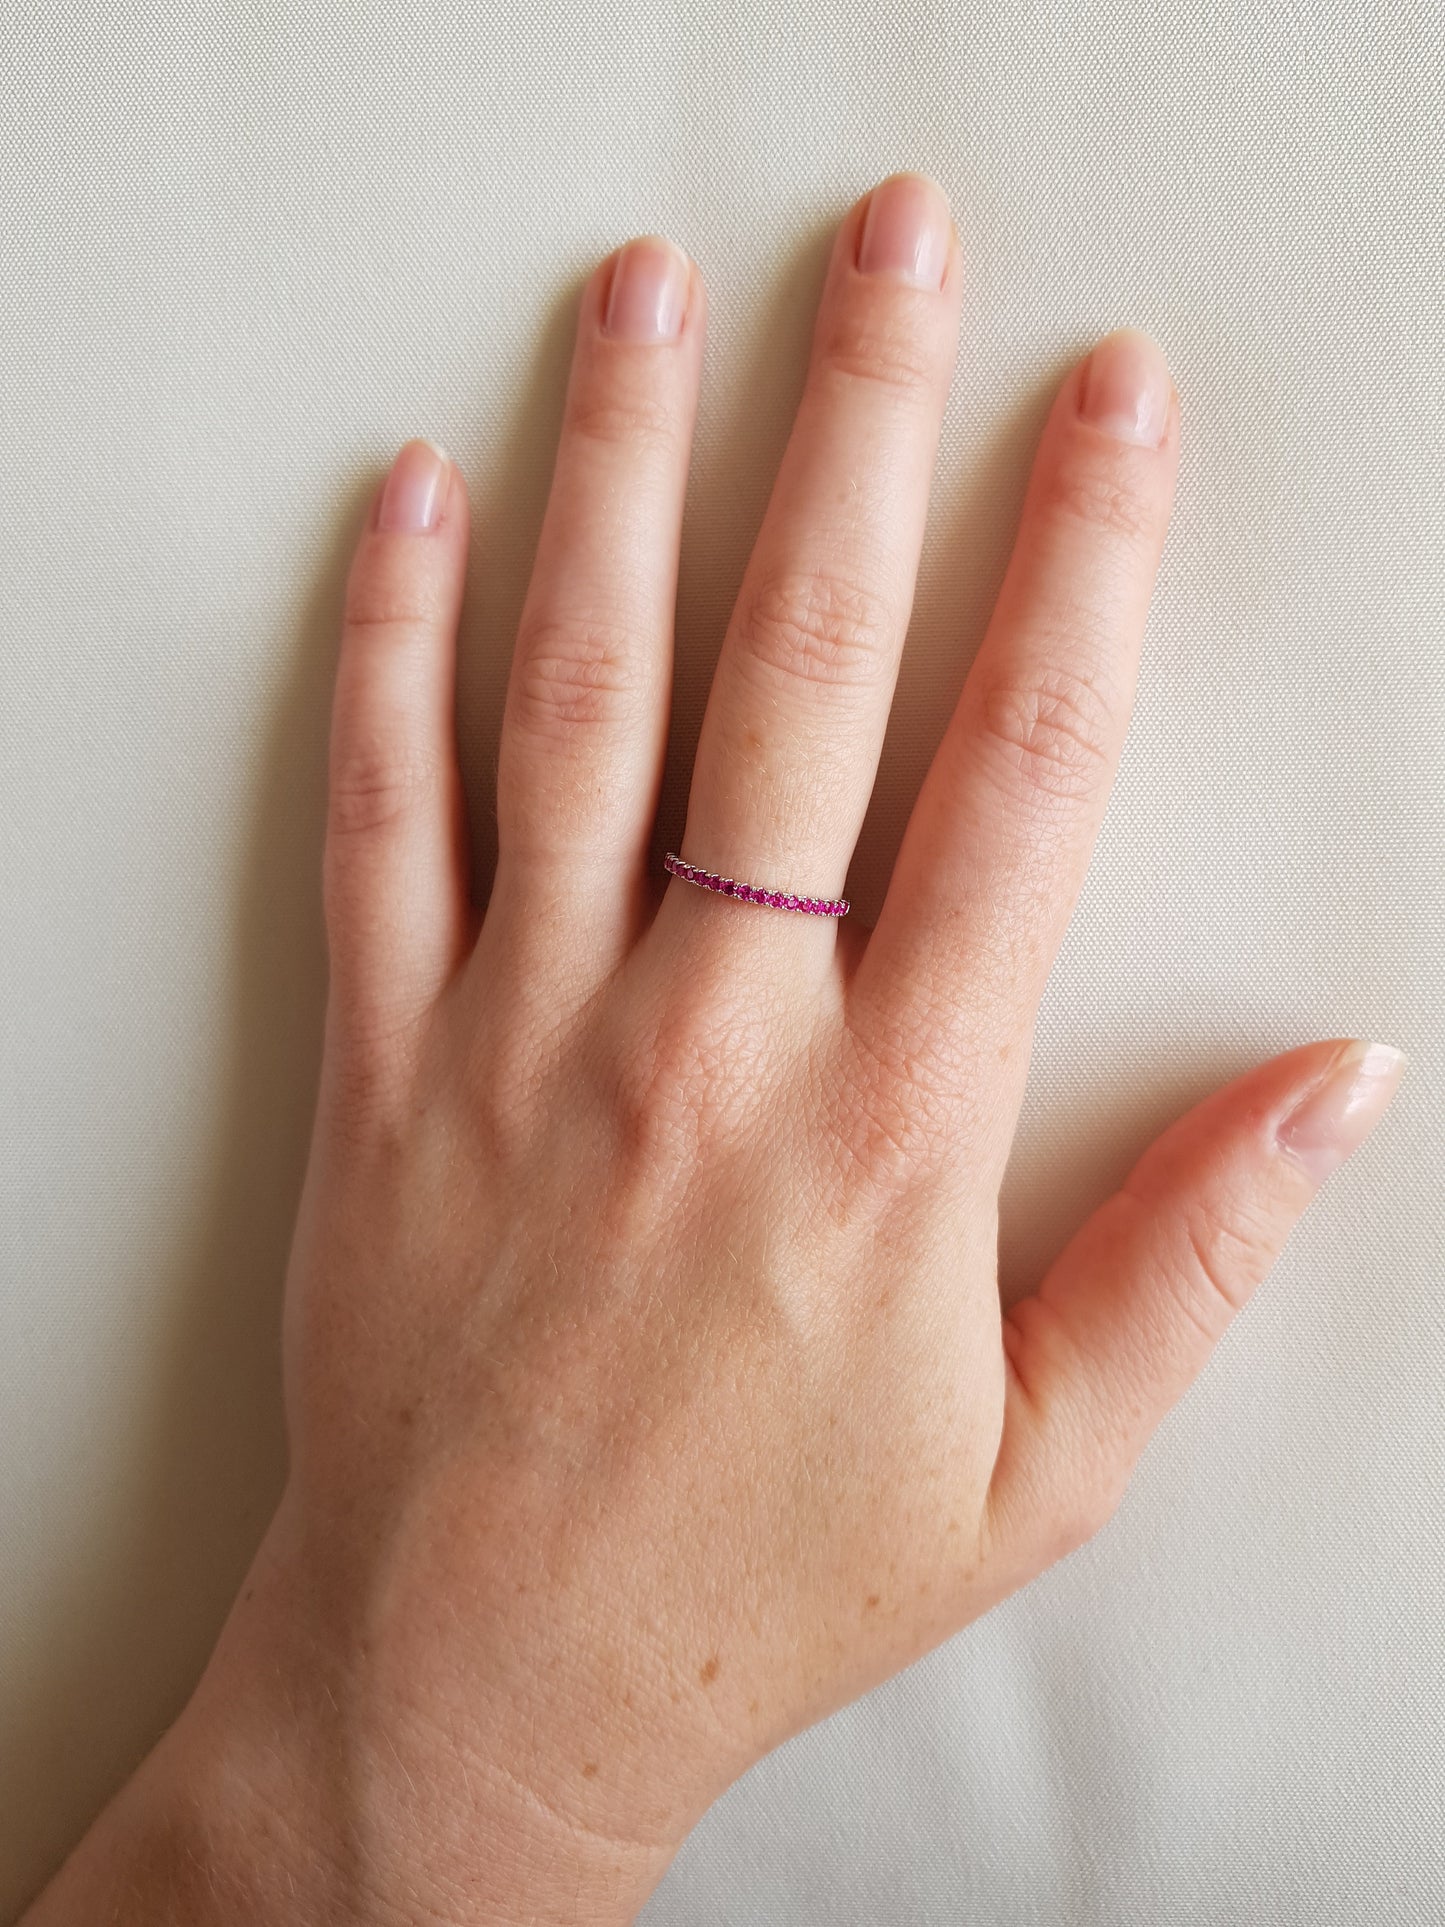 1.8mm wide Ruby Half Eternity ring  in white gold or Silver - stacking ring - wedding band - handmade engagement ring